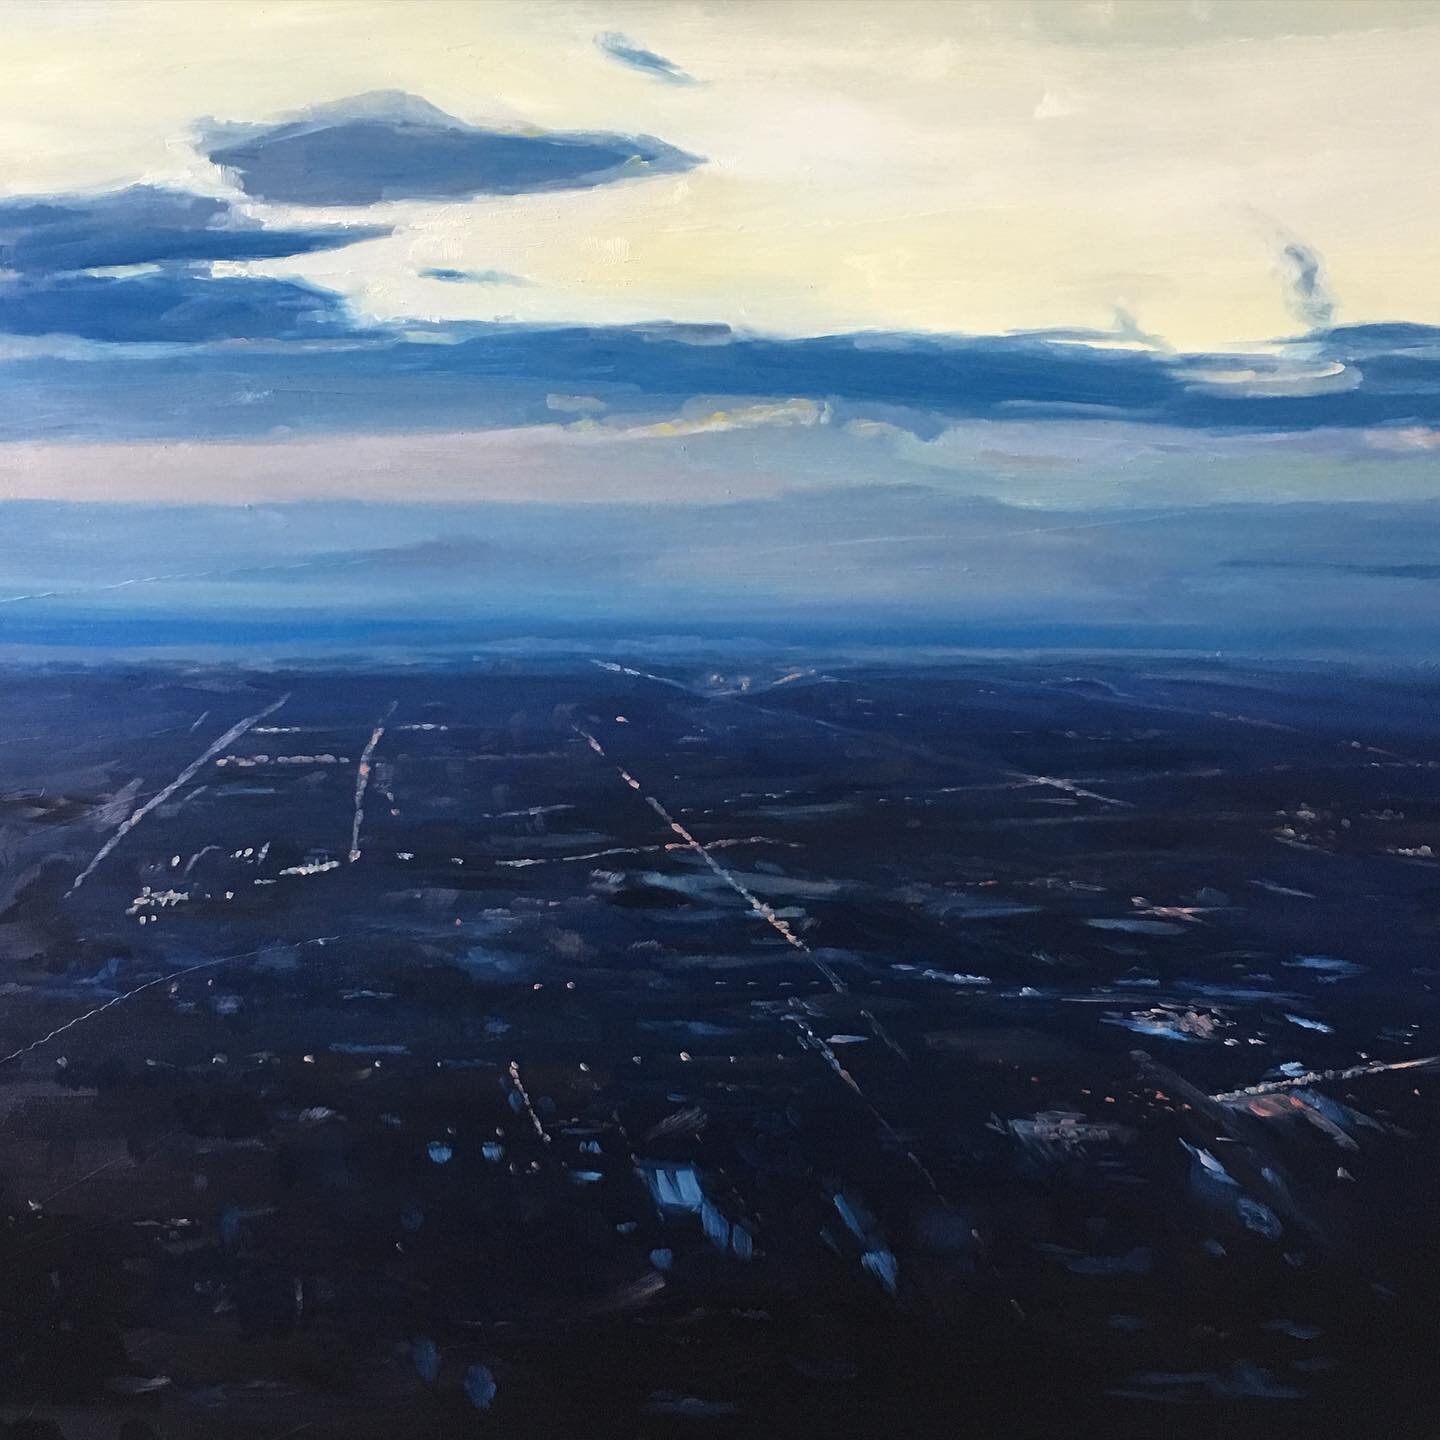 Crop of my painting &ldquo;Expanse&rdquo; oil on panel. I&rsquo;m excited to be invited to show this painting in University of Southern Mississippi&rsquo;s Painting National! Shipping out today 📦🎨#painting #usmgalleryofartanddesign